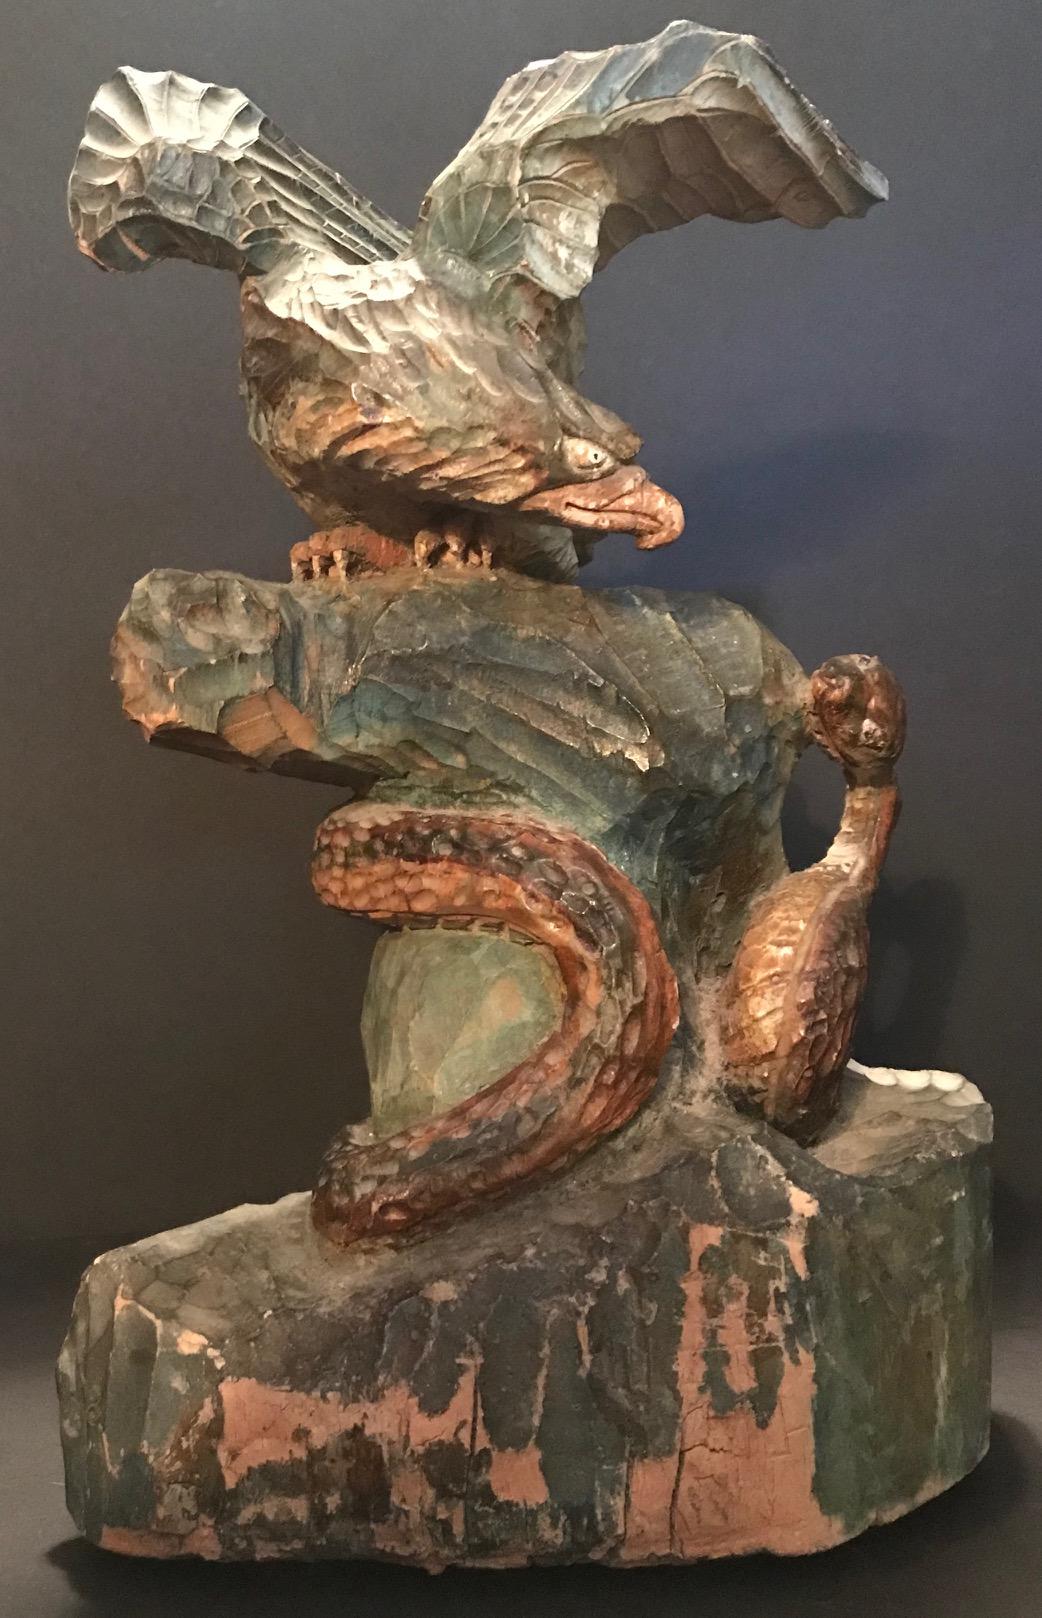 Our nation’s symbol is presented with its wings spread, perched on a rock ready to attack the aggressive serpent. This artistic and detailed wood carving displays a tremendous tension. The piece is polychrome painted in muted colors. There is some